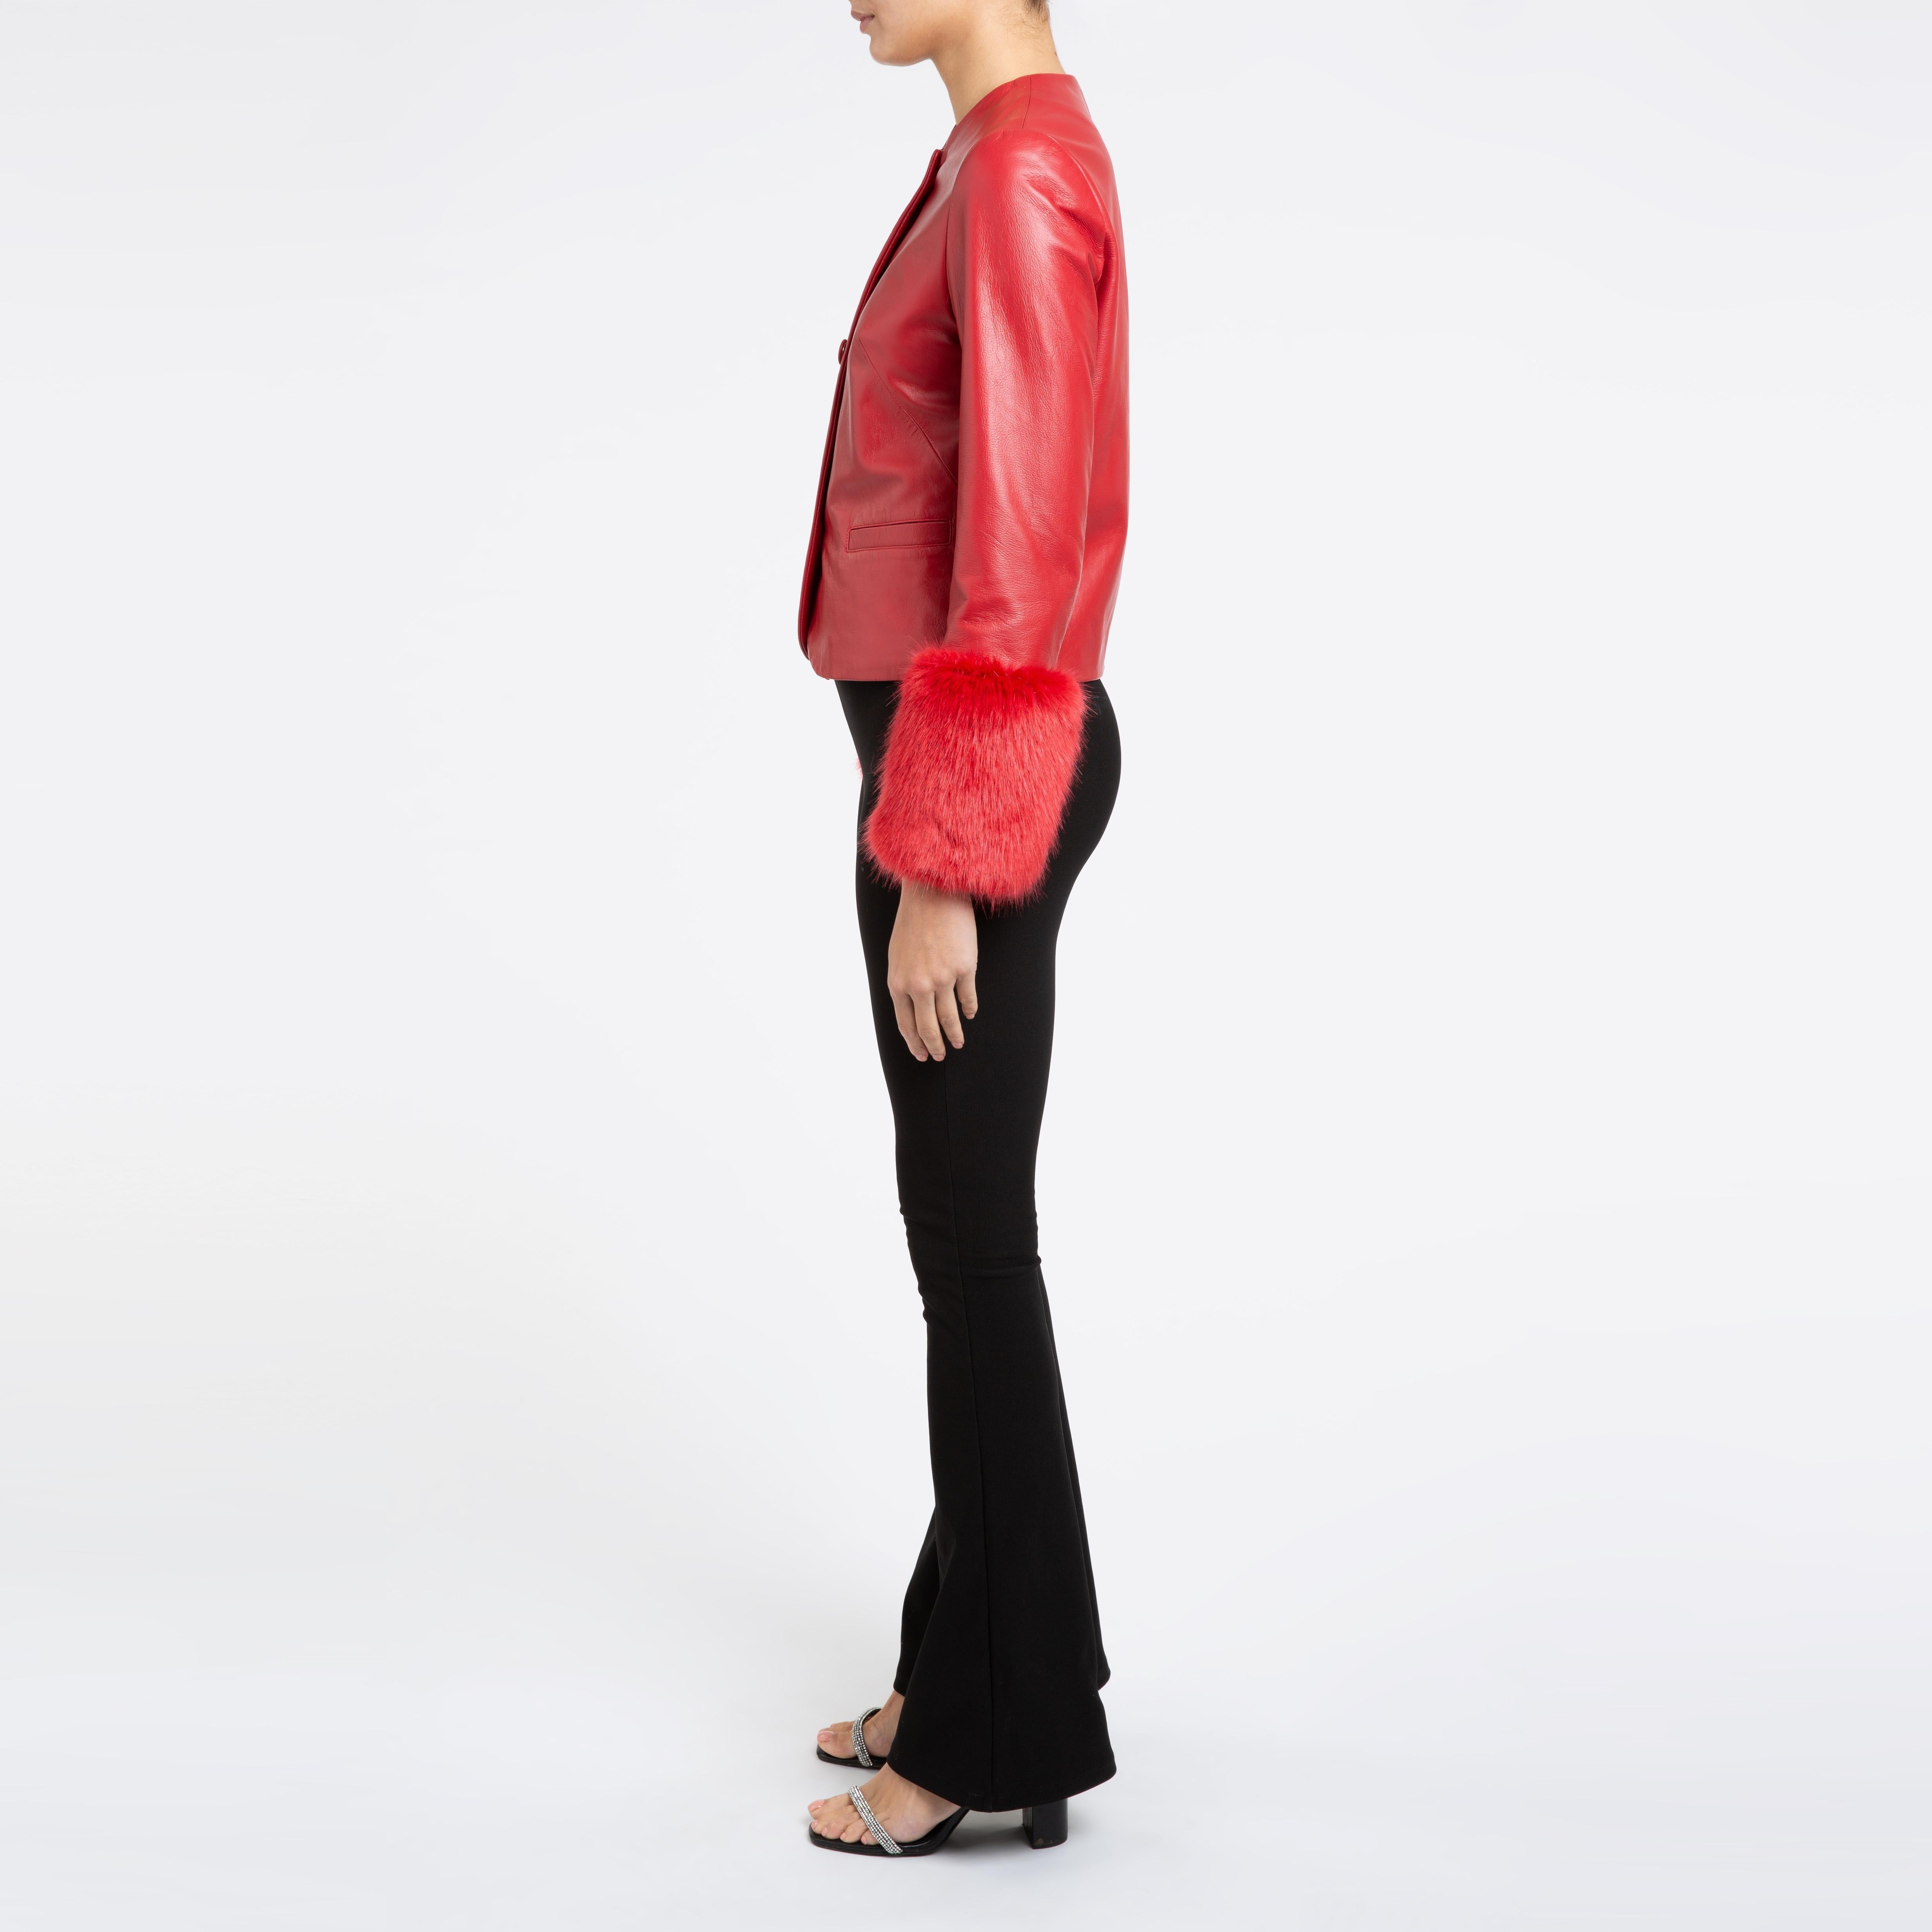 Verheyen Vita Cropped Jacket in Red Leather with Faux Fur - Size uk 10 2